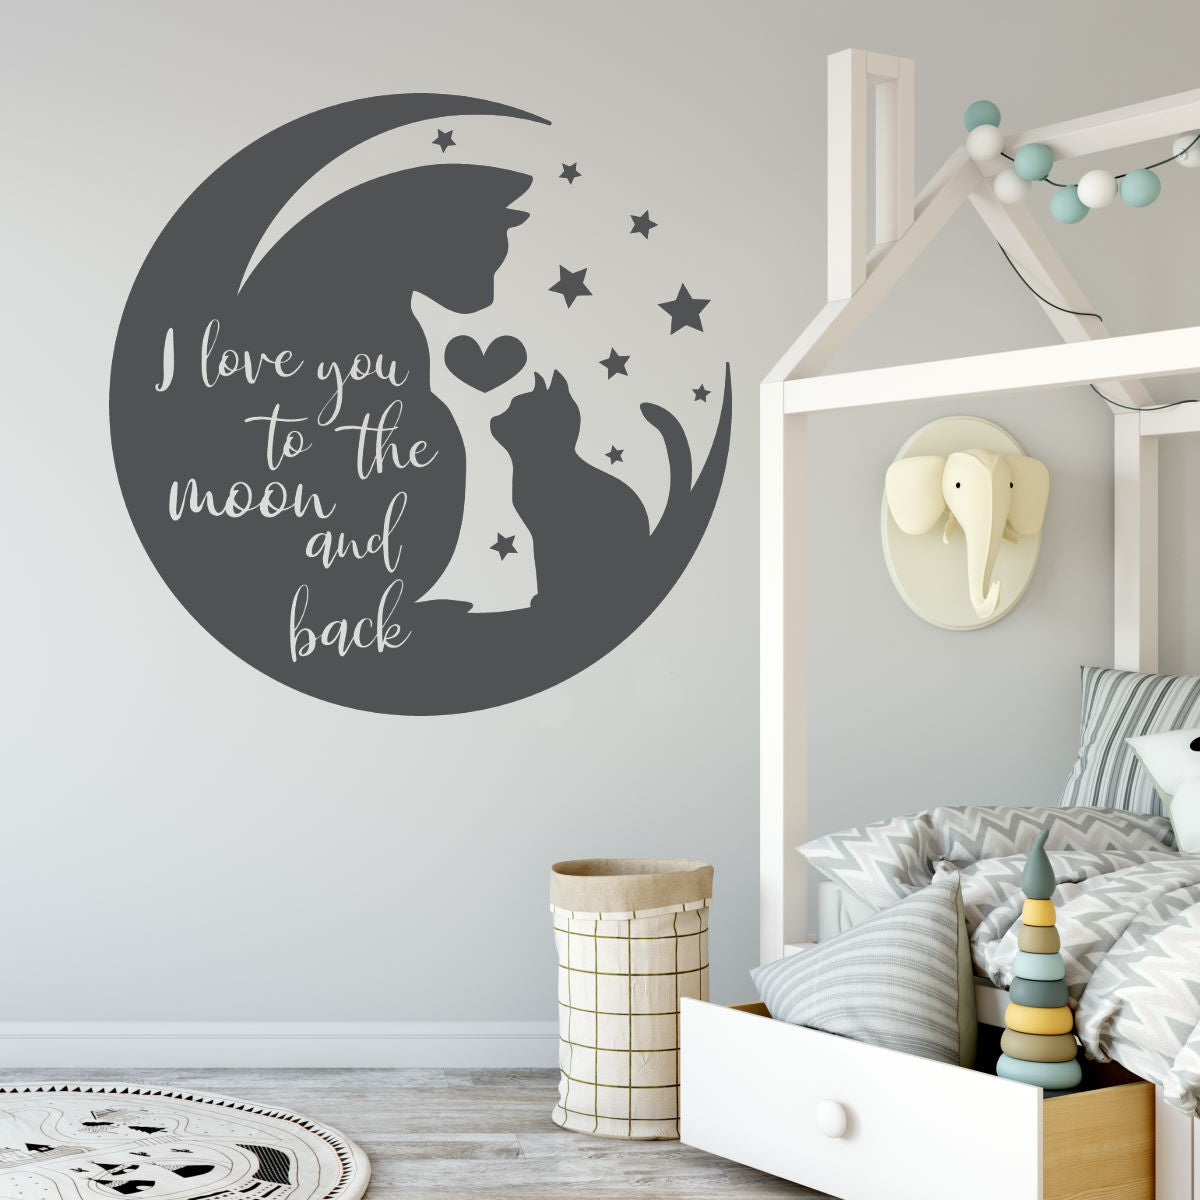 adorable kitten and its mother on the moon wall decal